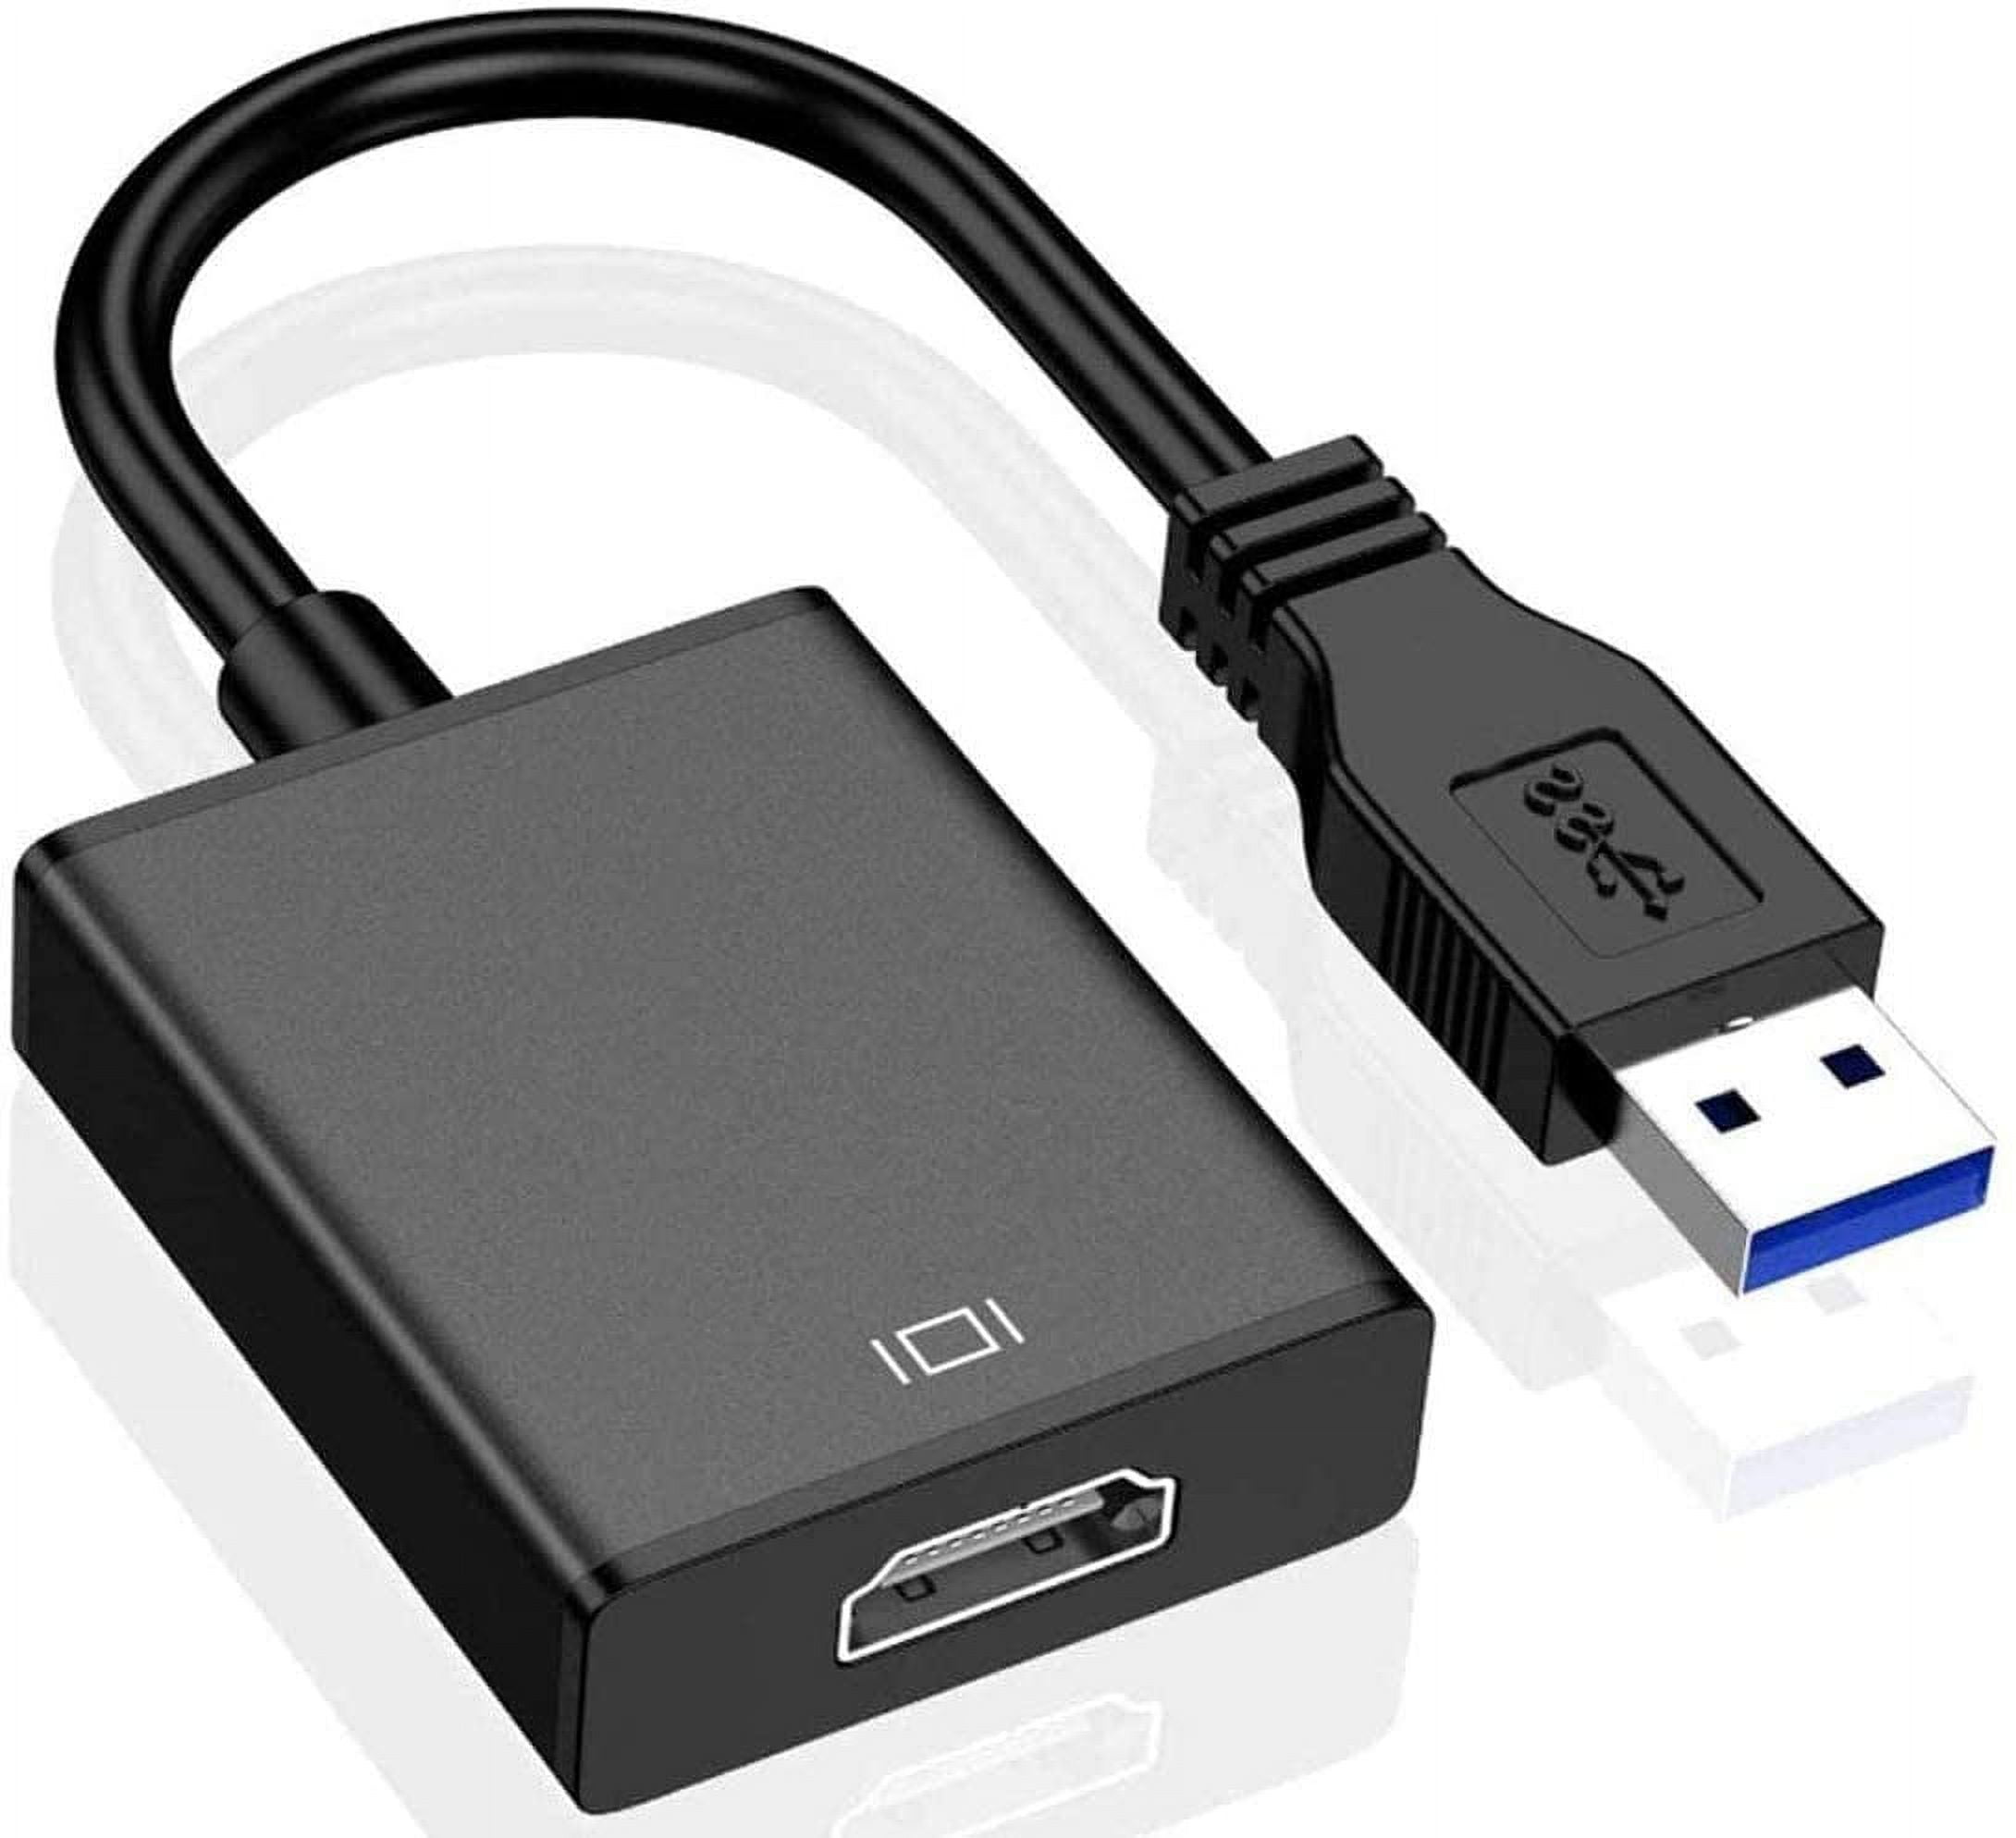 USB to HDMI Adapter, USB 3.0/2.0 to HDMI 1080P Video Graphics Cable  Converter with Audio for PC Laptop Projector HDTV Compatible with Windows  XP 7/8/8.1/10，Mac OS 